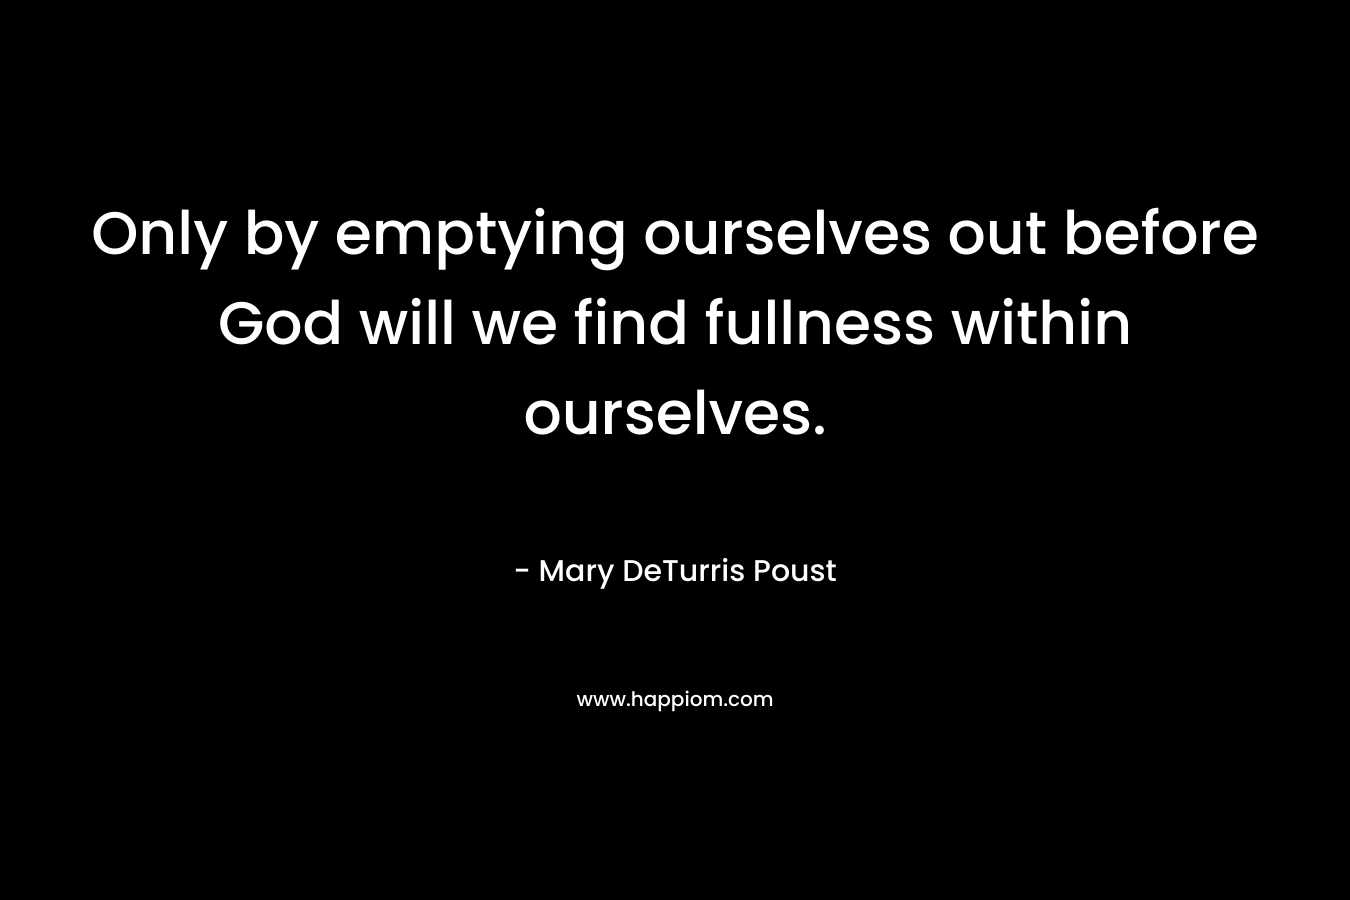 Only by emptying ourselves out before God will we find fullness within ourselves. – Mary DeTurris Poust